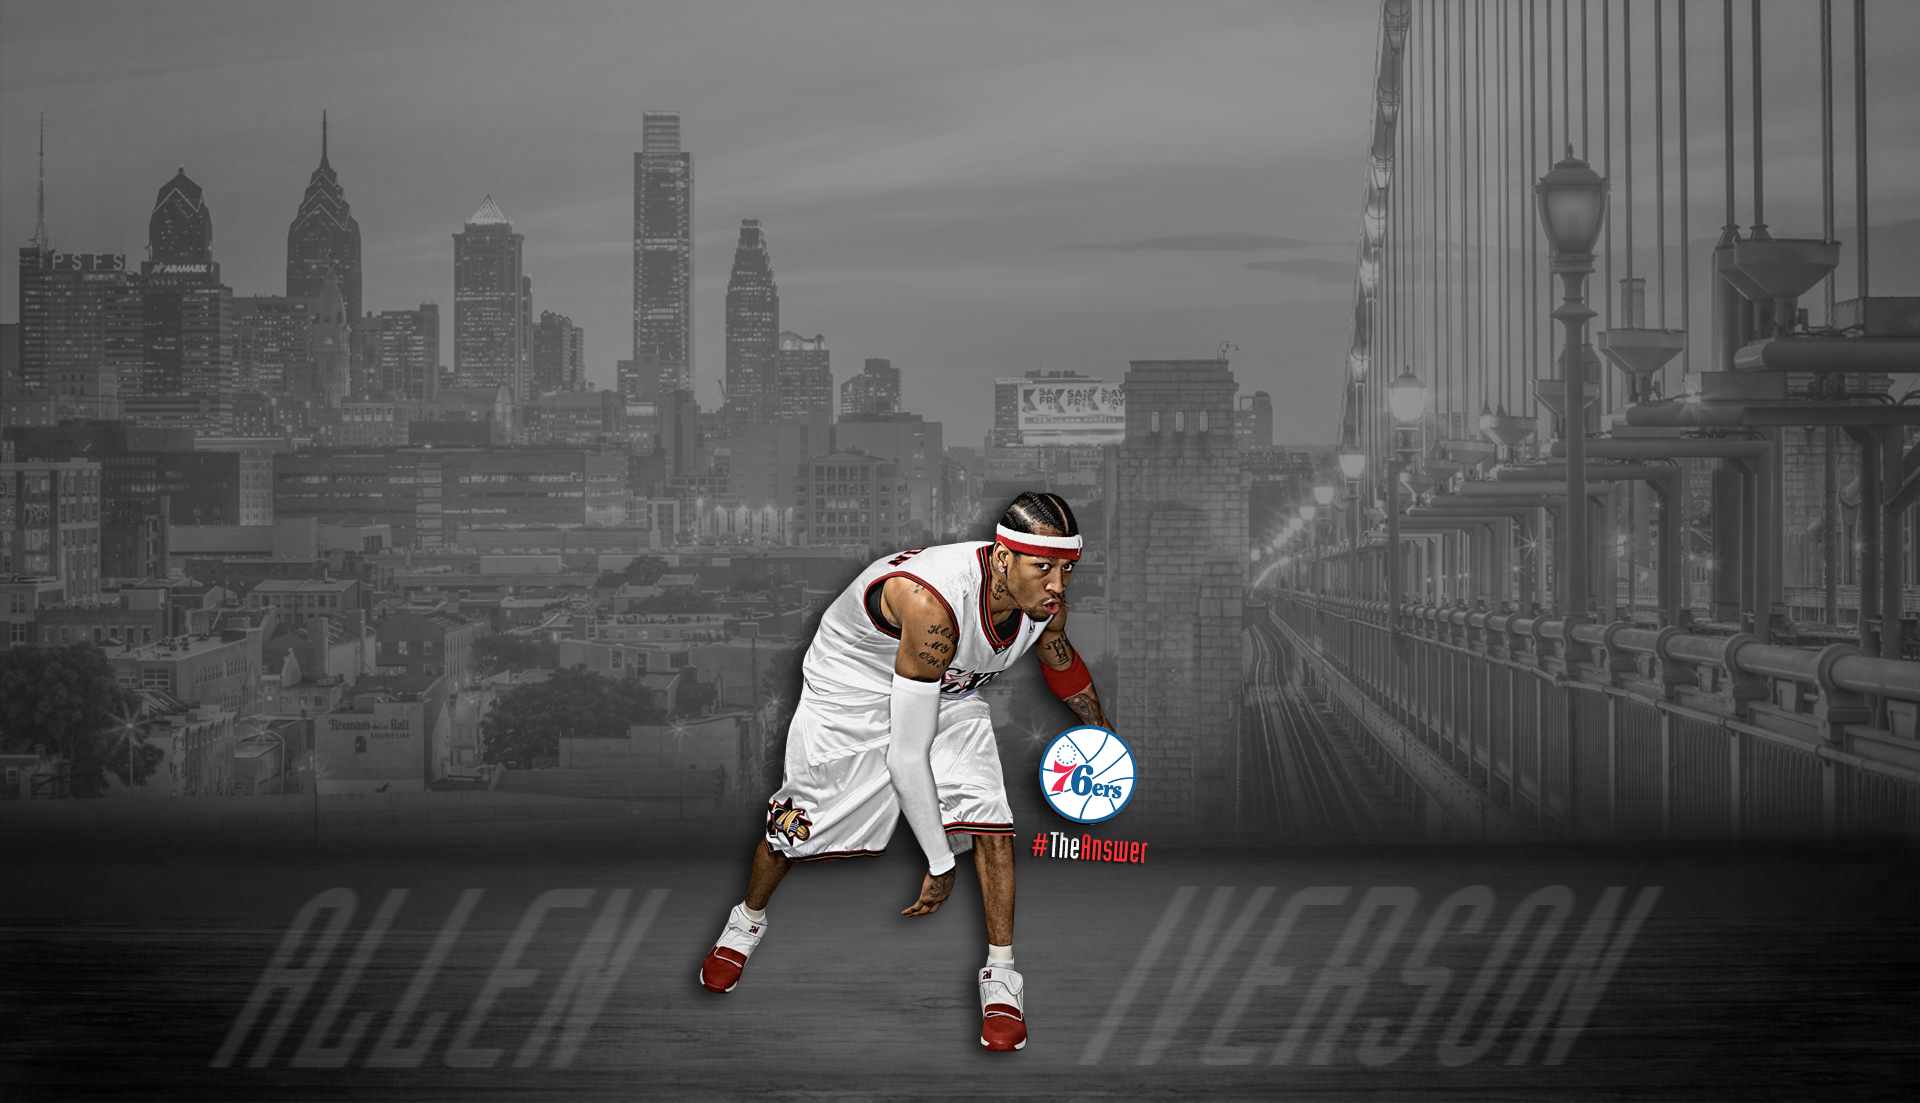 Pictures Download Allen Iverson Wallpapers Hd - Allen Iverson Wallpaper 2010 - HD Wallpaper 